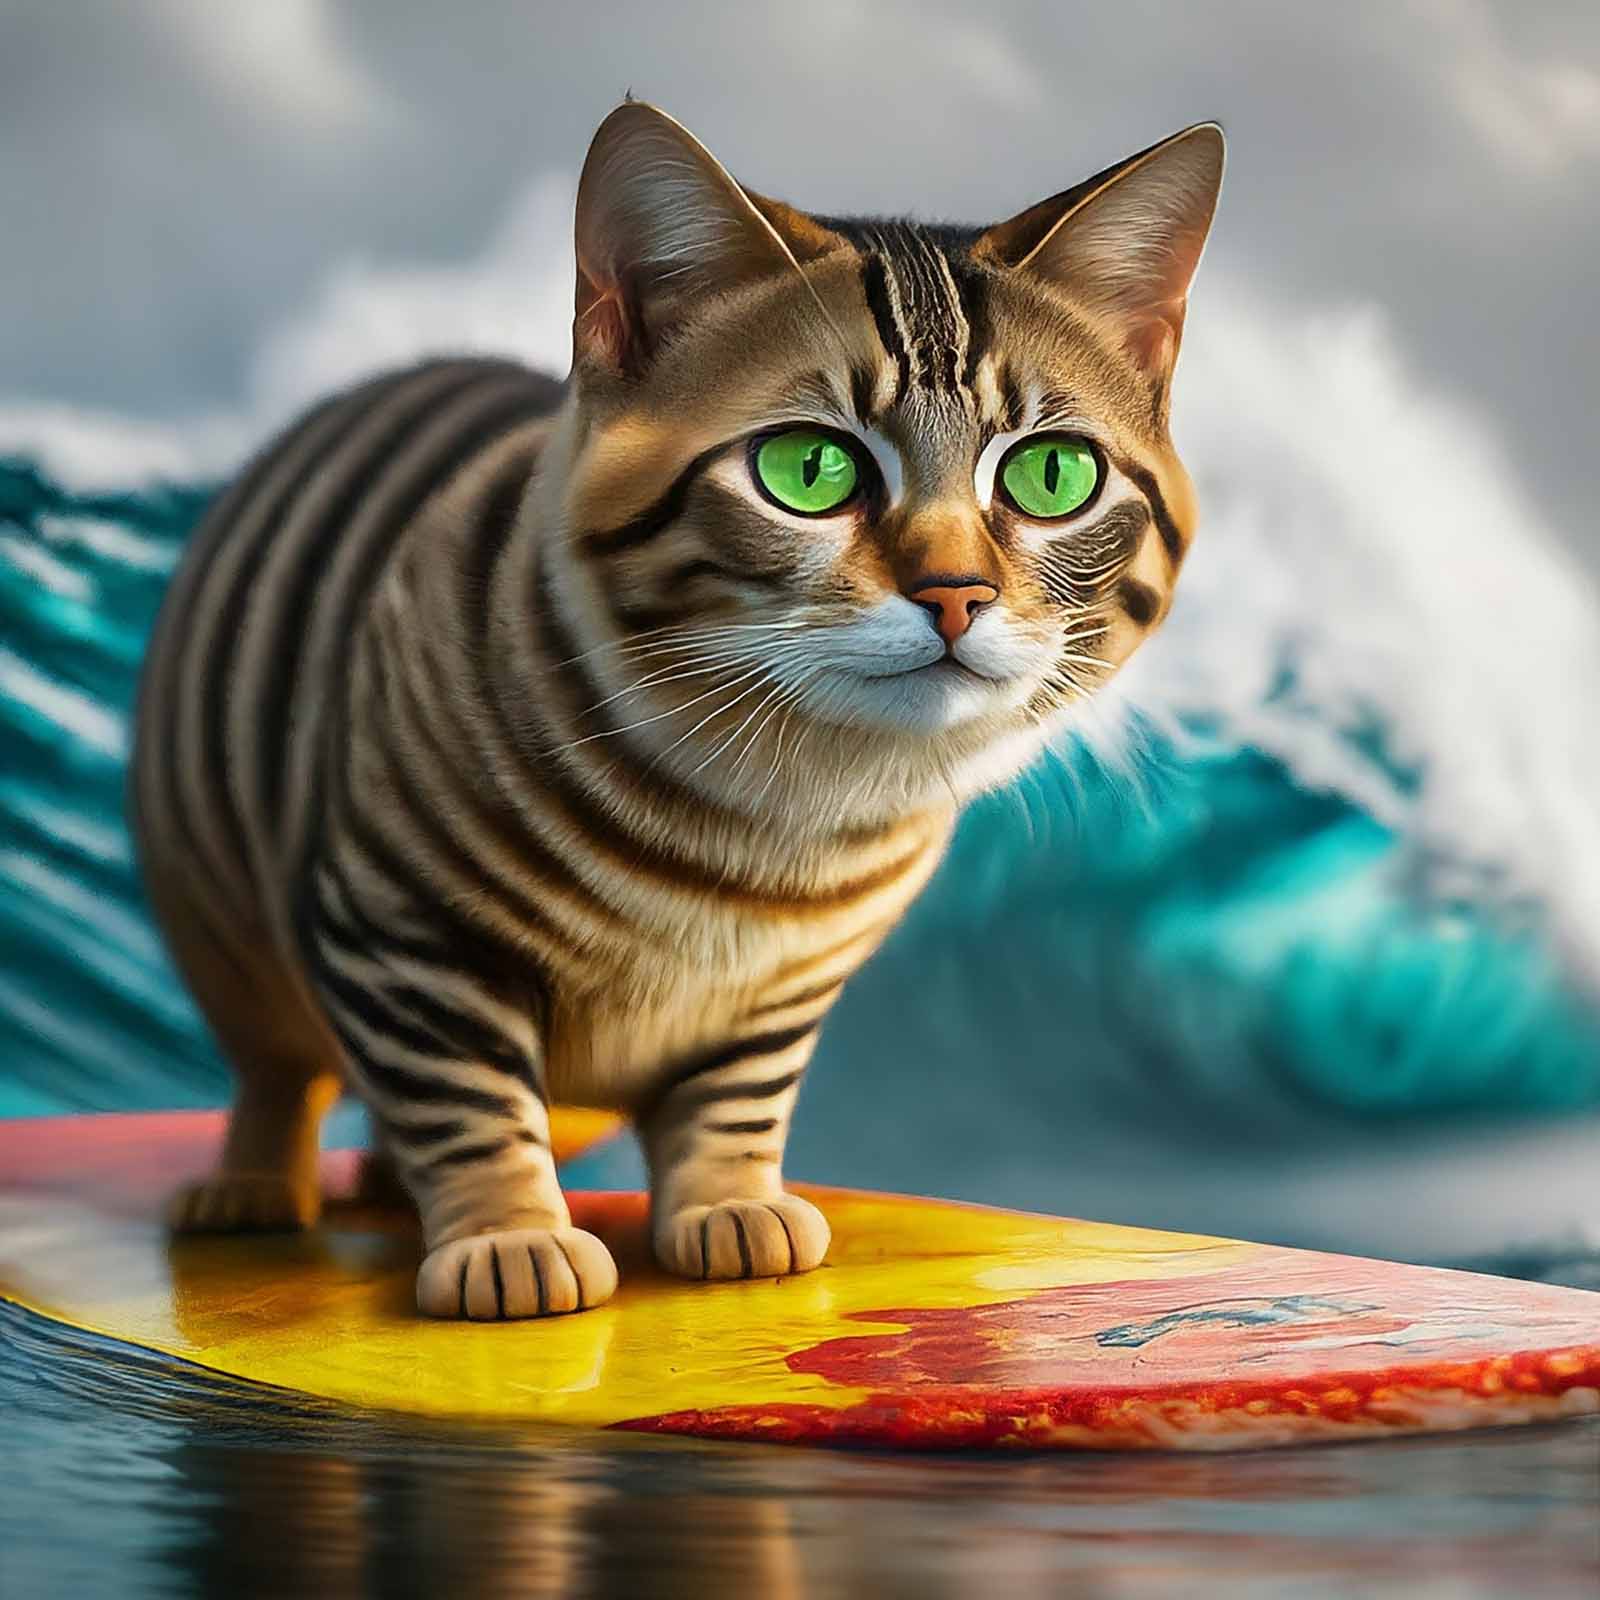 A Cat Surfer With Green Eyes Gracefully Balances On A Surfboard.